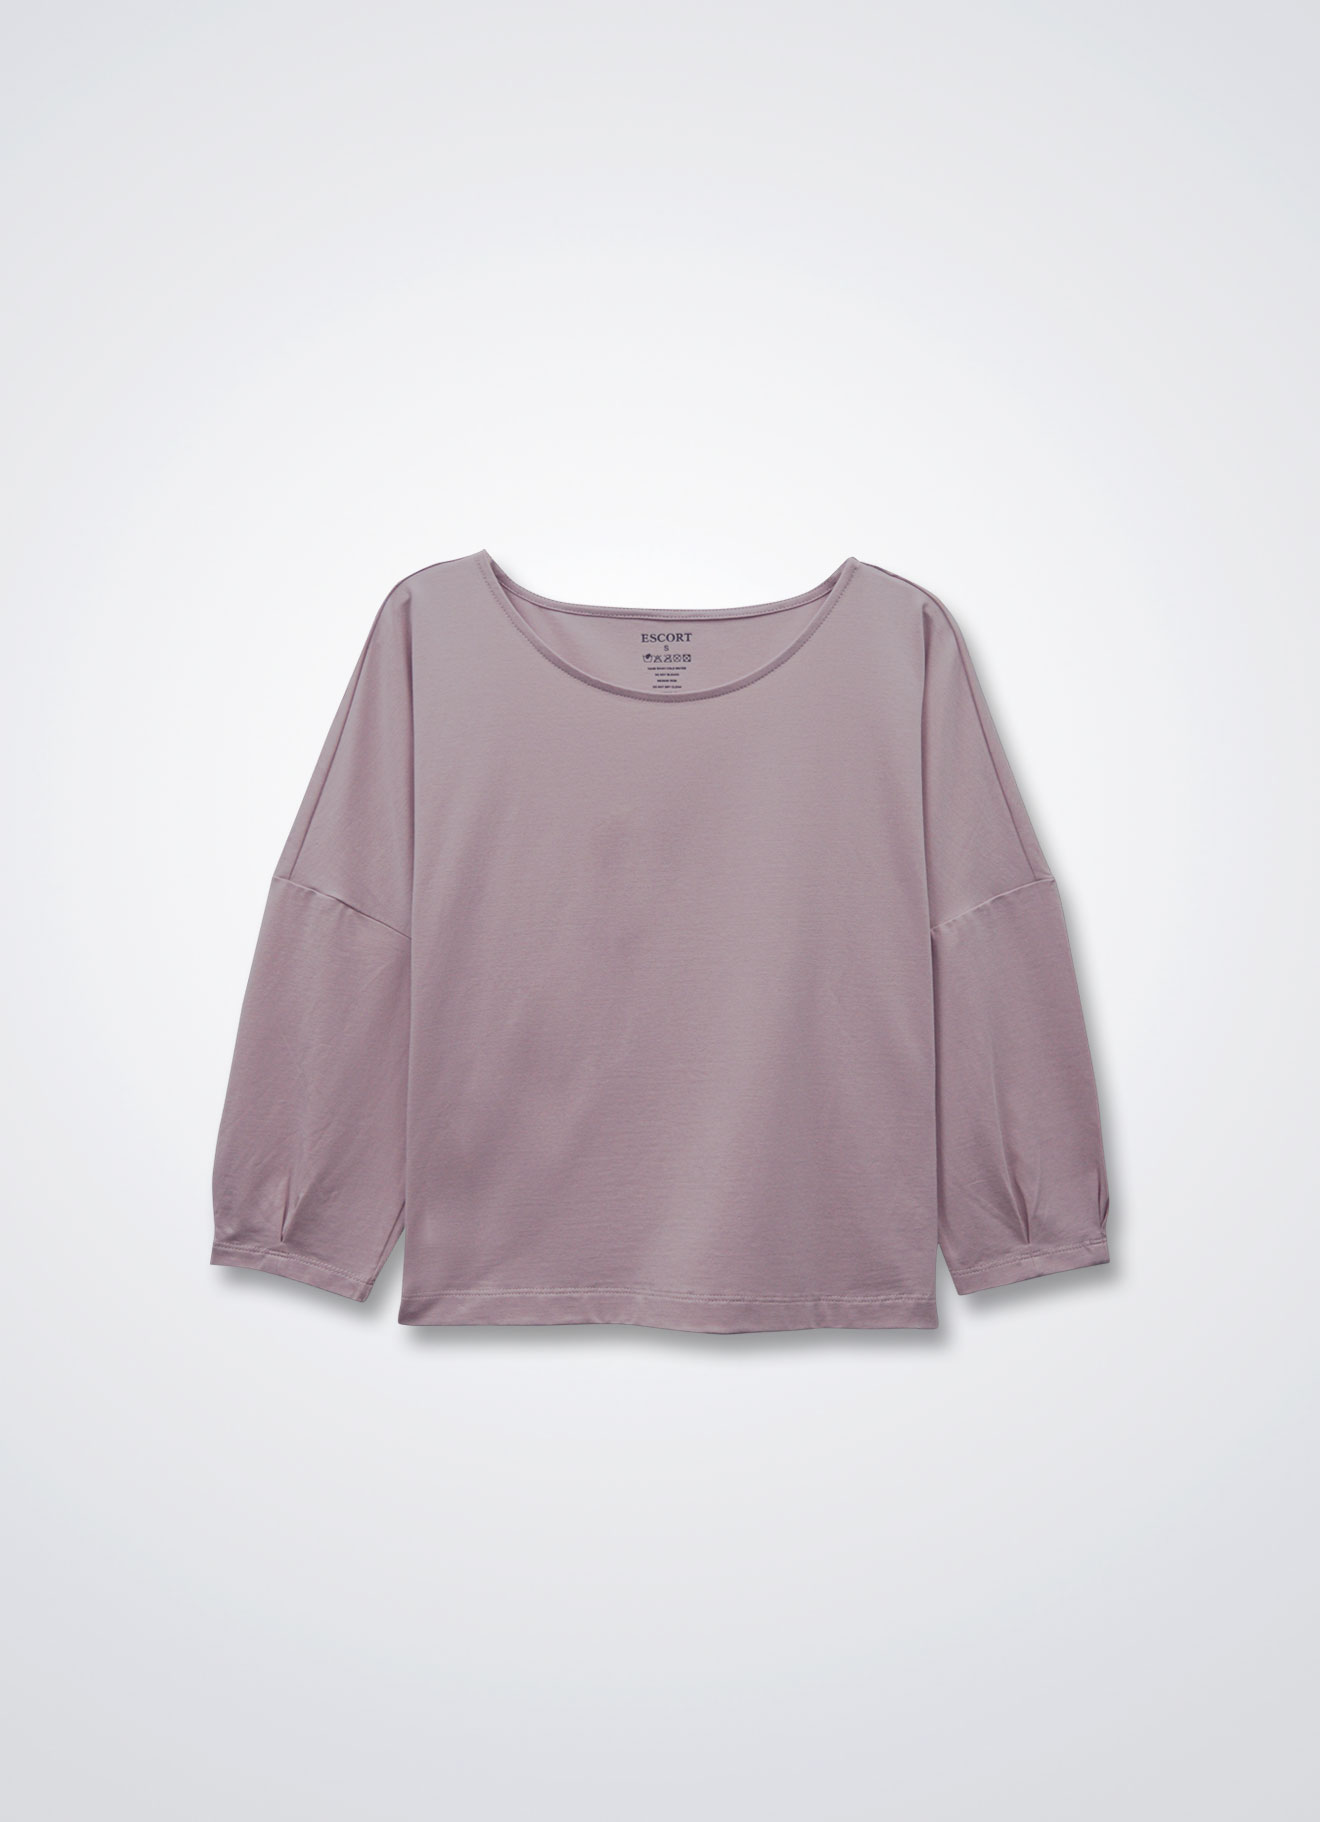 Misty-Rose by Sleeve Top